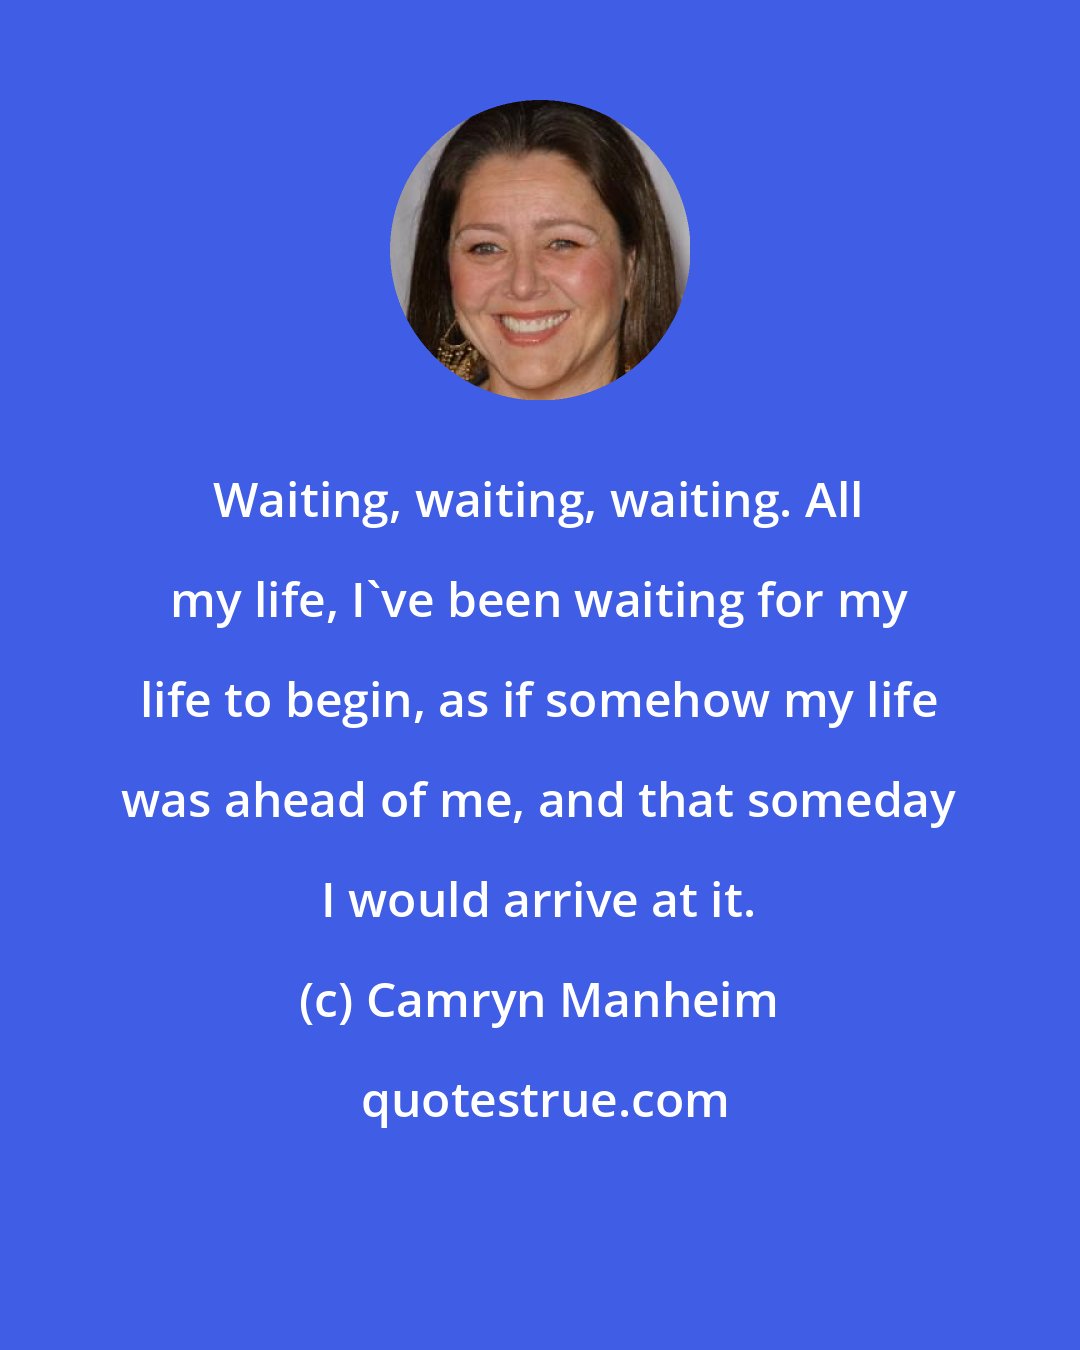 Camryn Manheim: Waiting, waiting, waiting. All my life, I've been waiting for my life to begin, as if somehow my life was ahead of me, and that someday I would arrive at it.